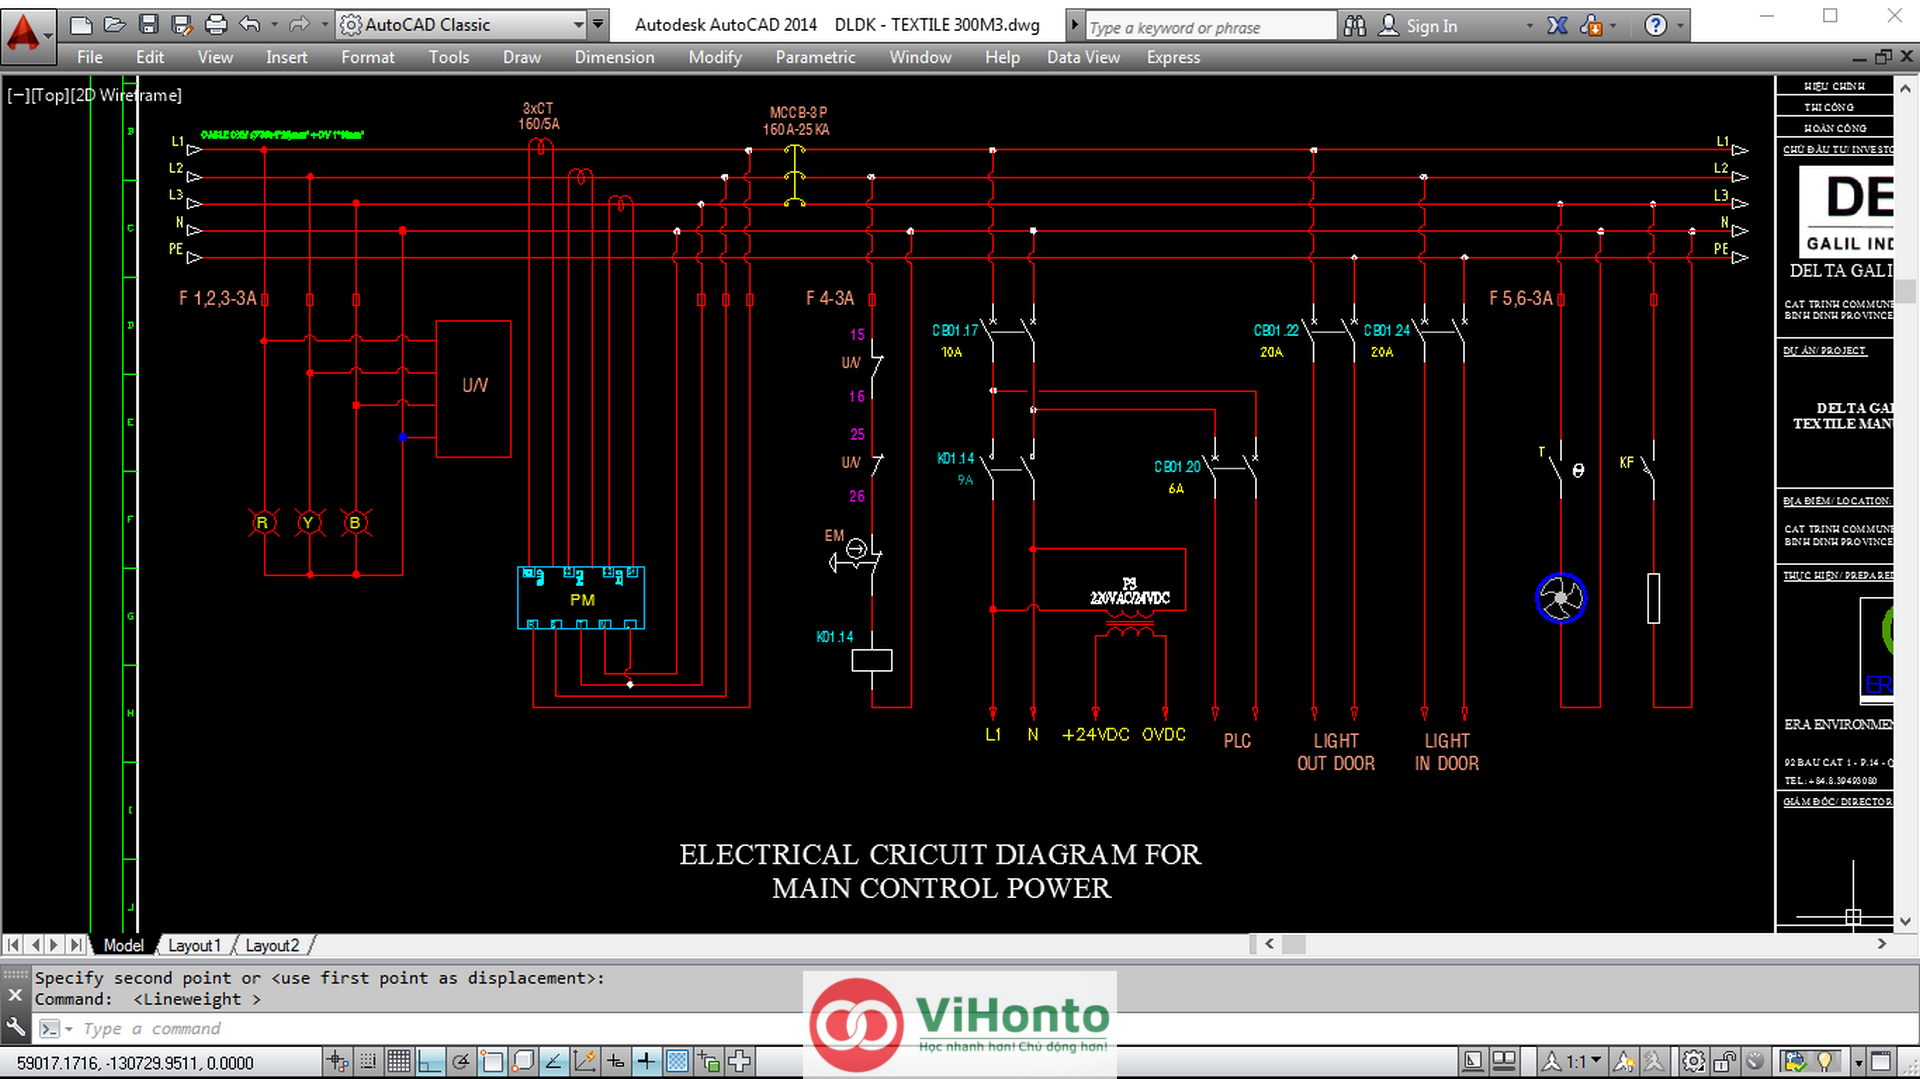 AutoCAD-ung-dung-trong-nganh-dien-tu-dong-1 [HDTV (1080)]